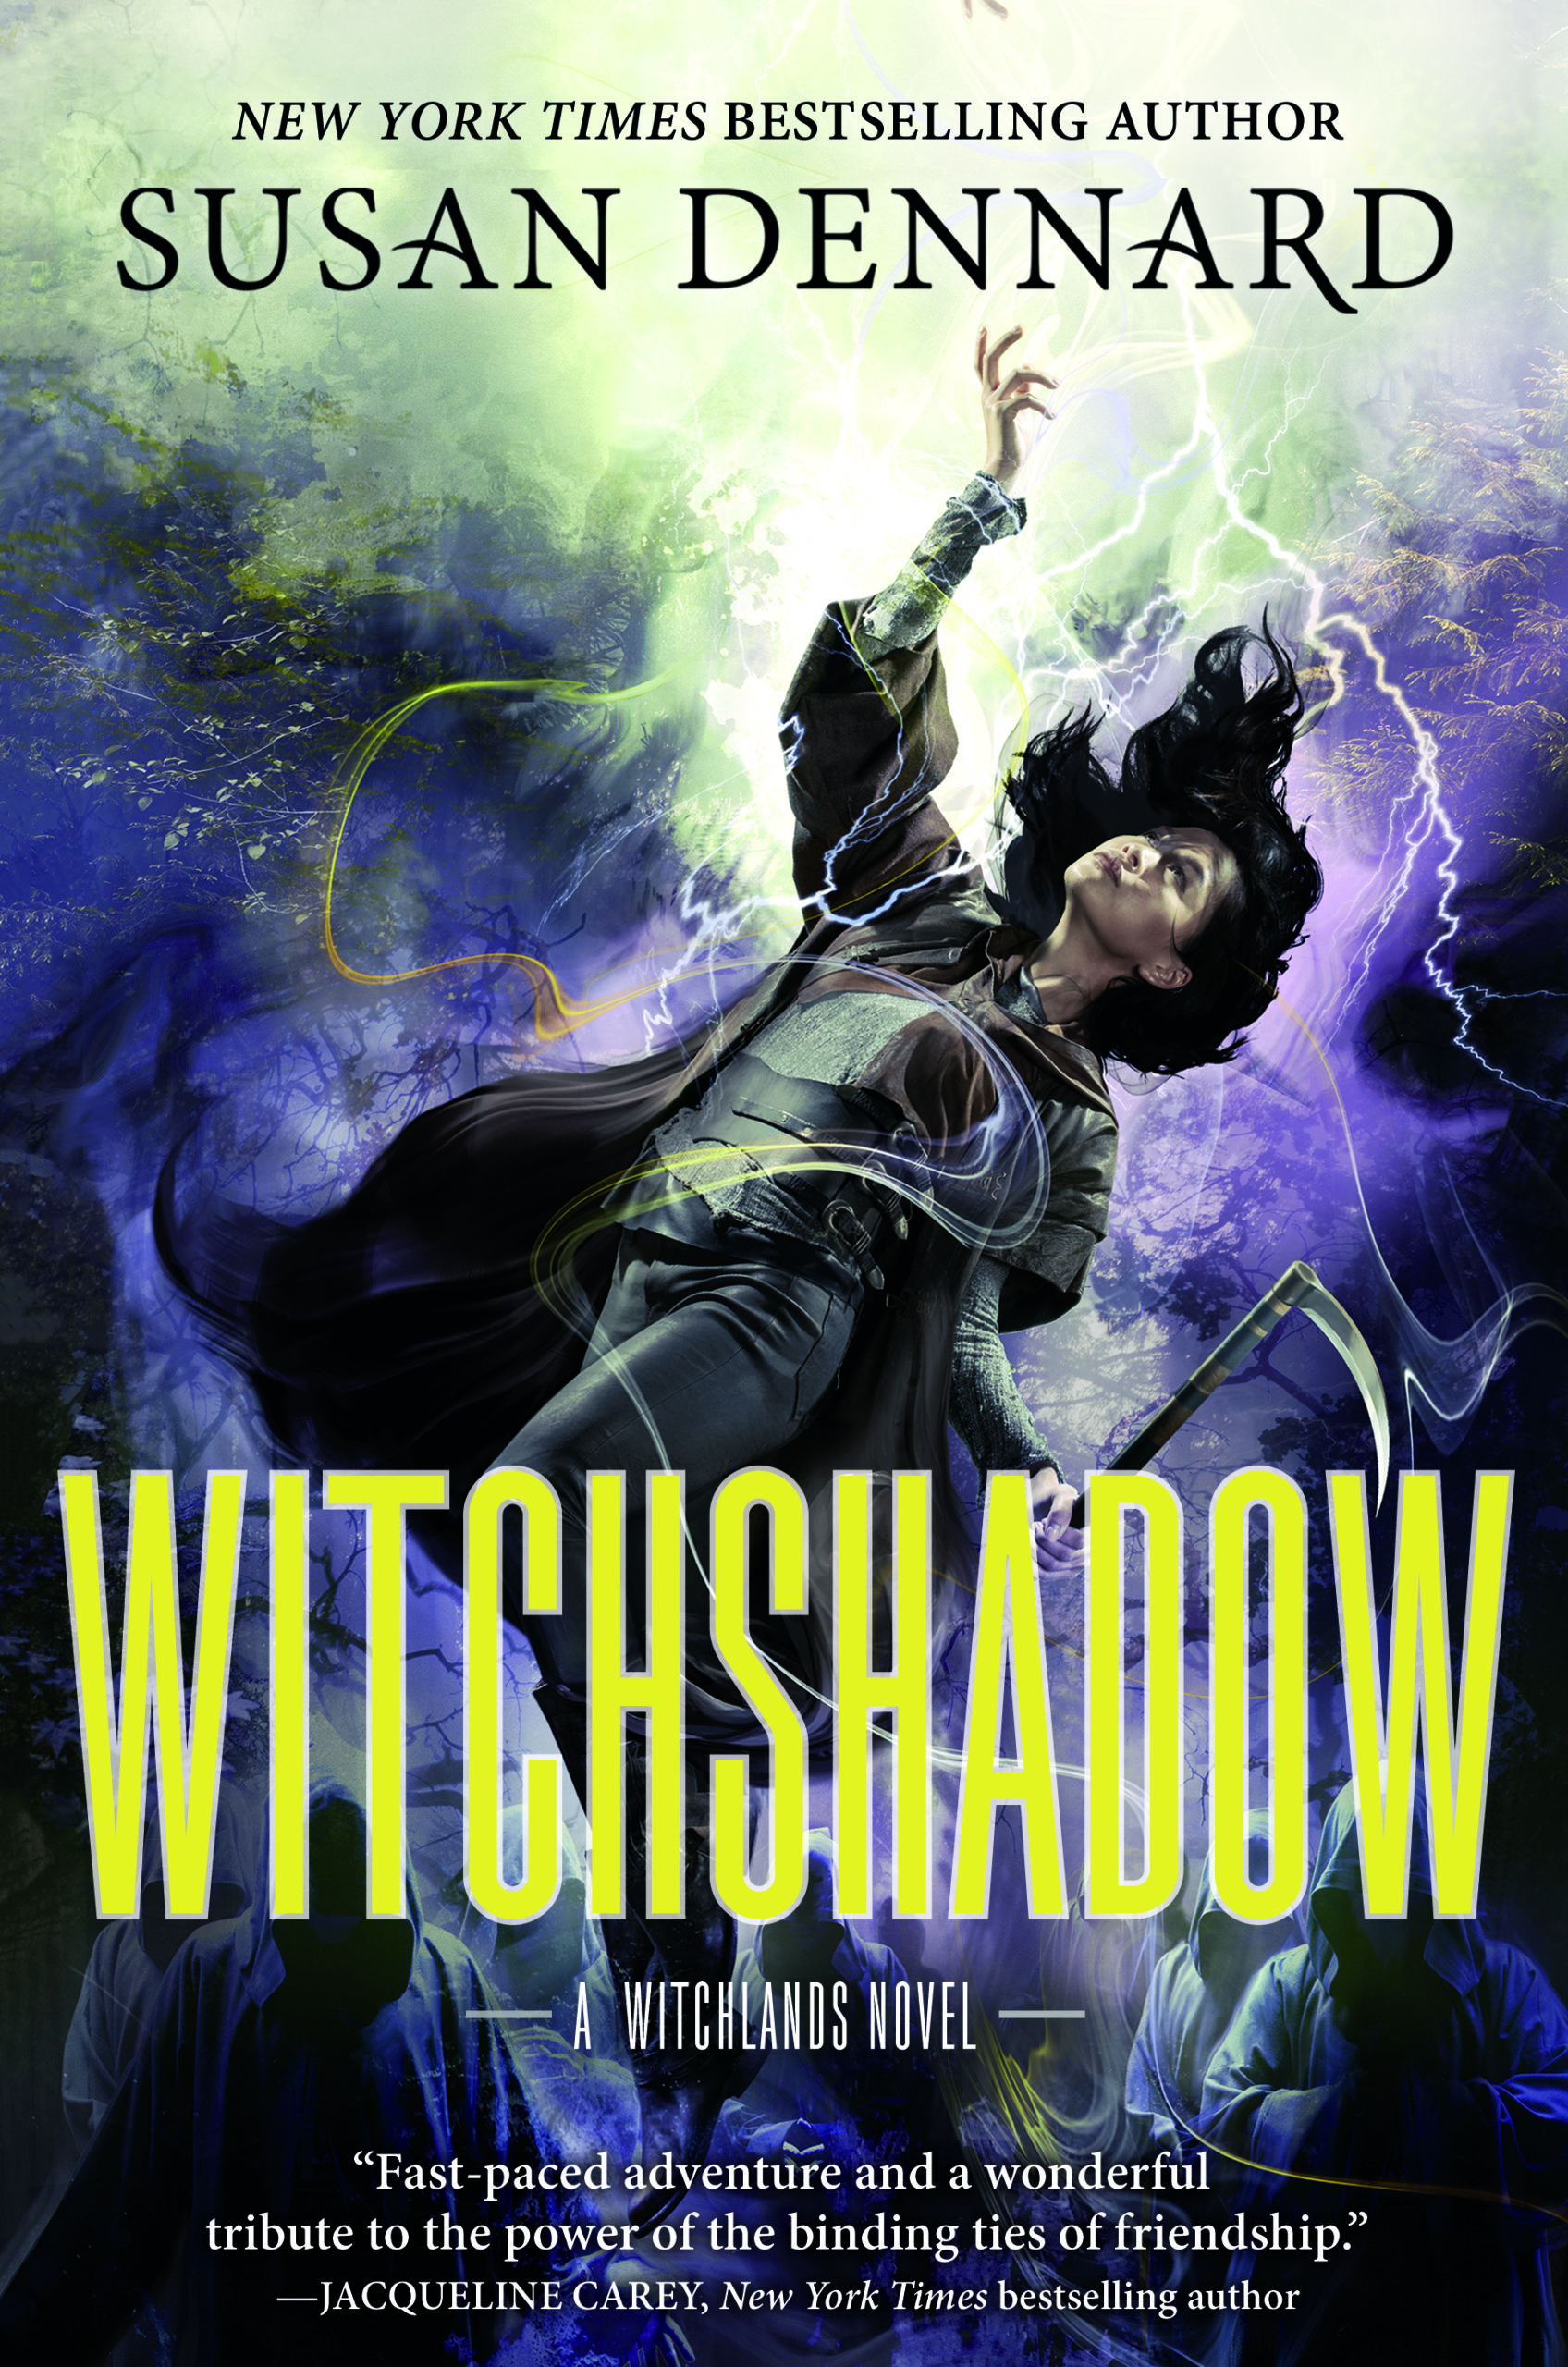 the cover for Witchshadowss